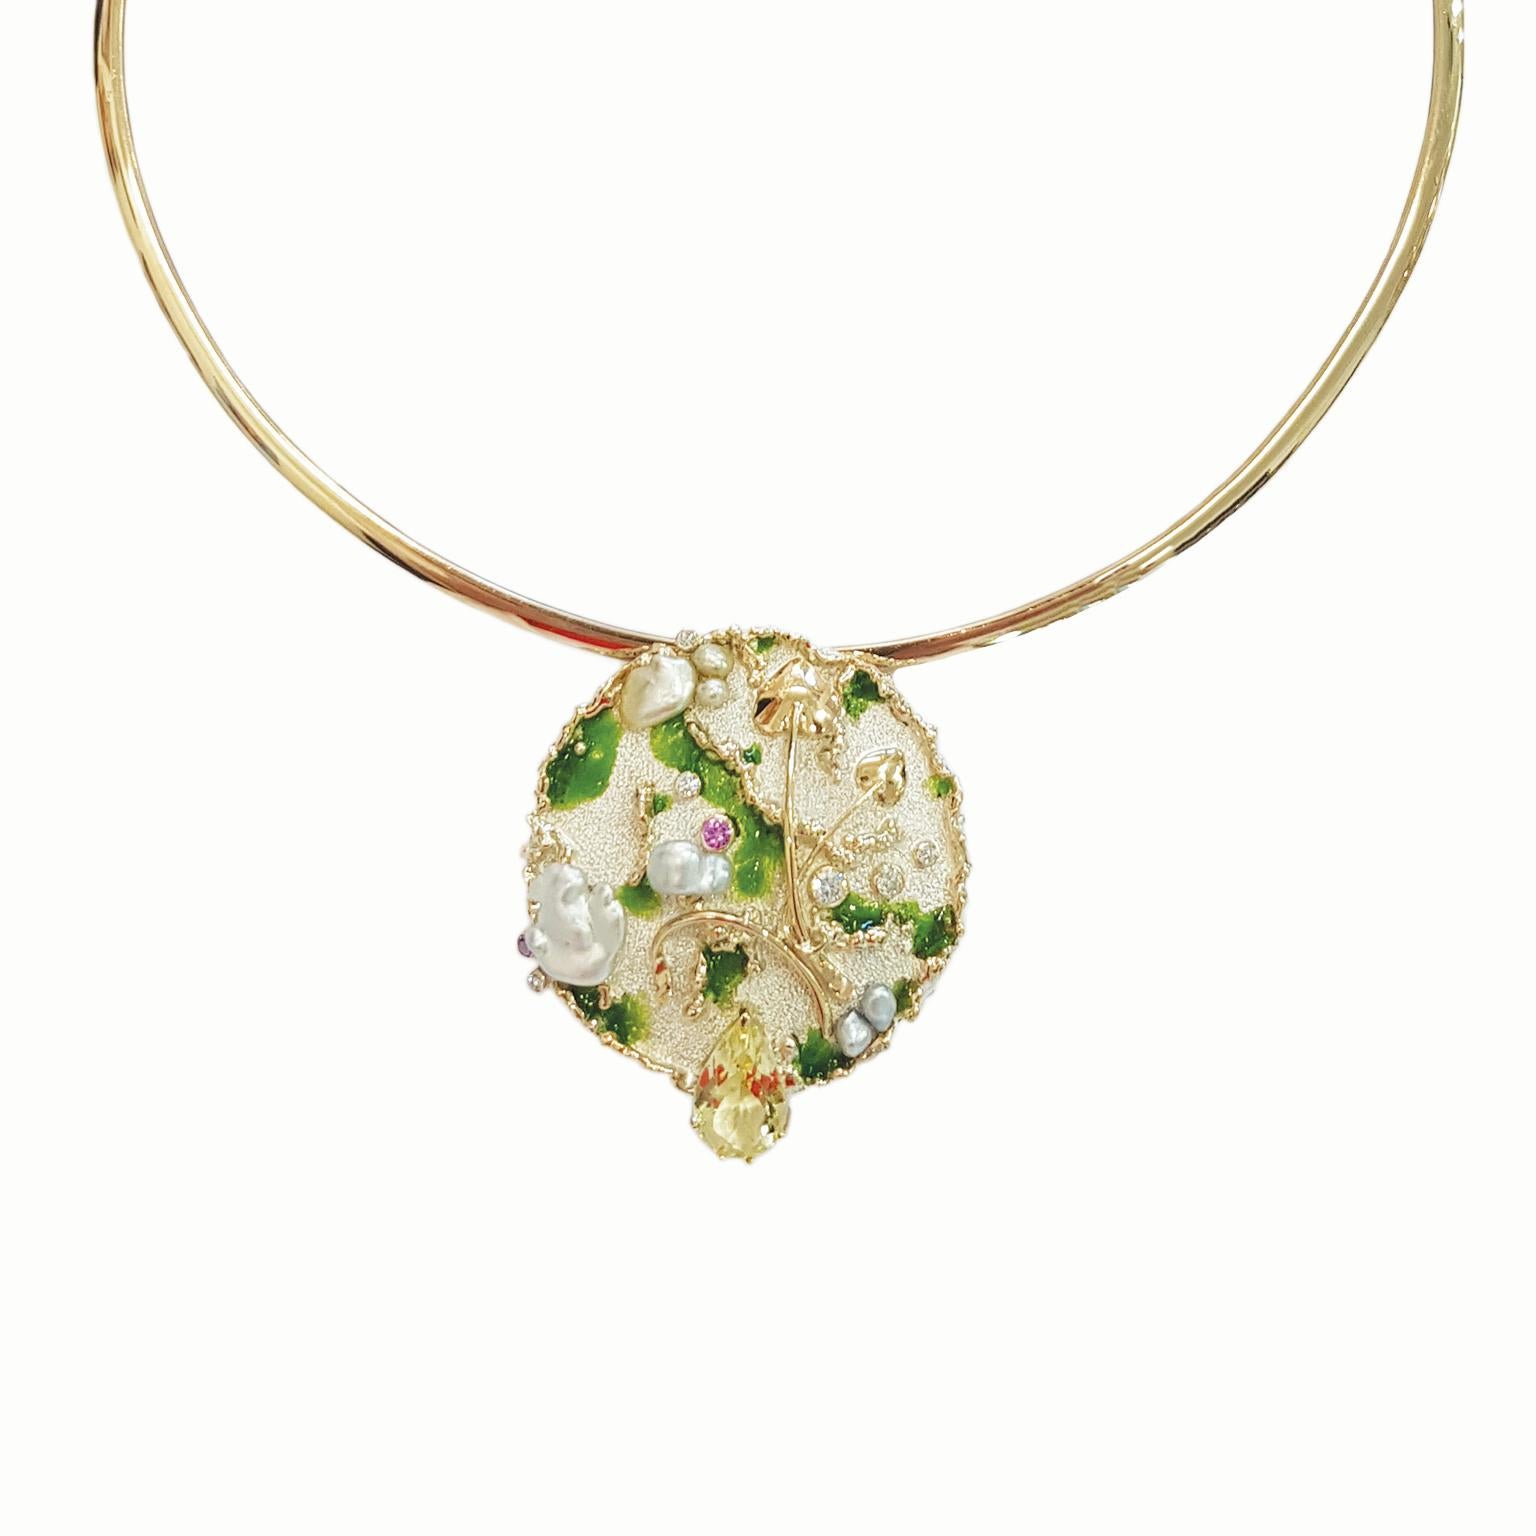 Paul Amey’s “Lemon Sherbet” pendant is a totally unique and completely handcrafted and created by Paul Amey. This signature molten edge natural green quartz, diamond, sapphire and pearl pendant was crafted from Sterling Silver (tarnish resistant)